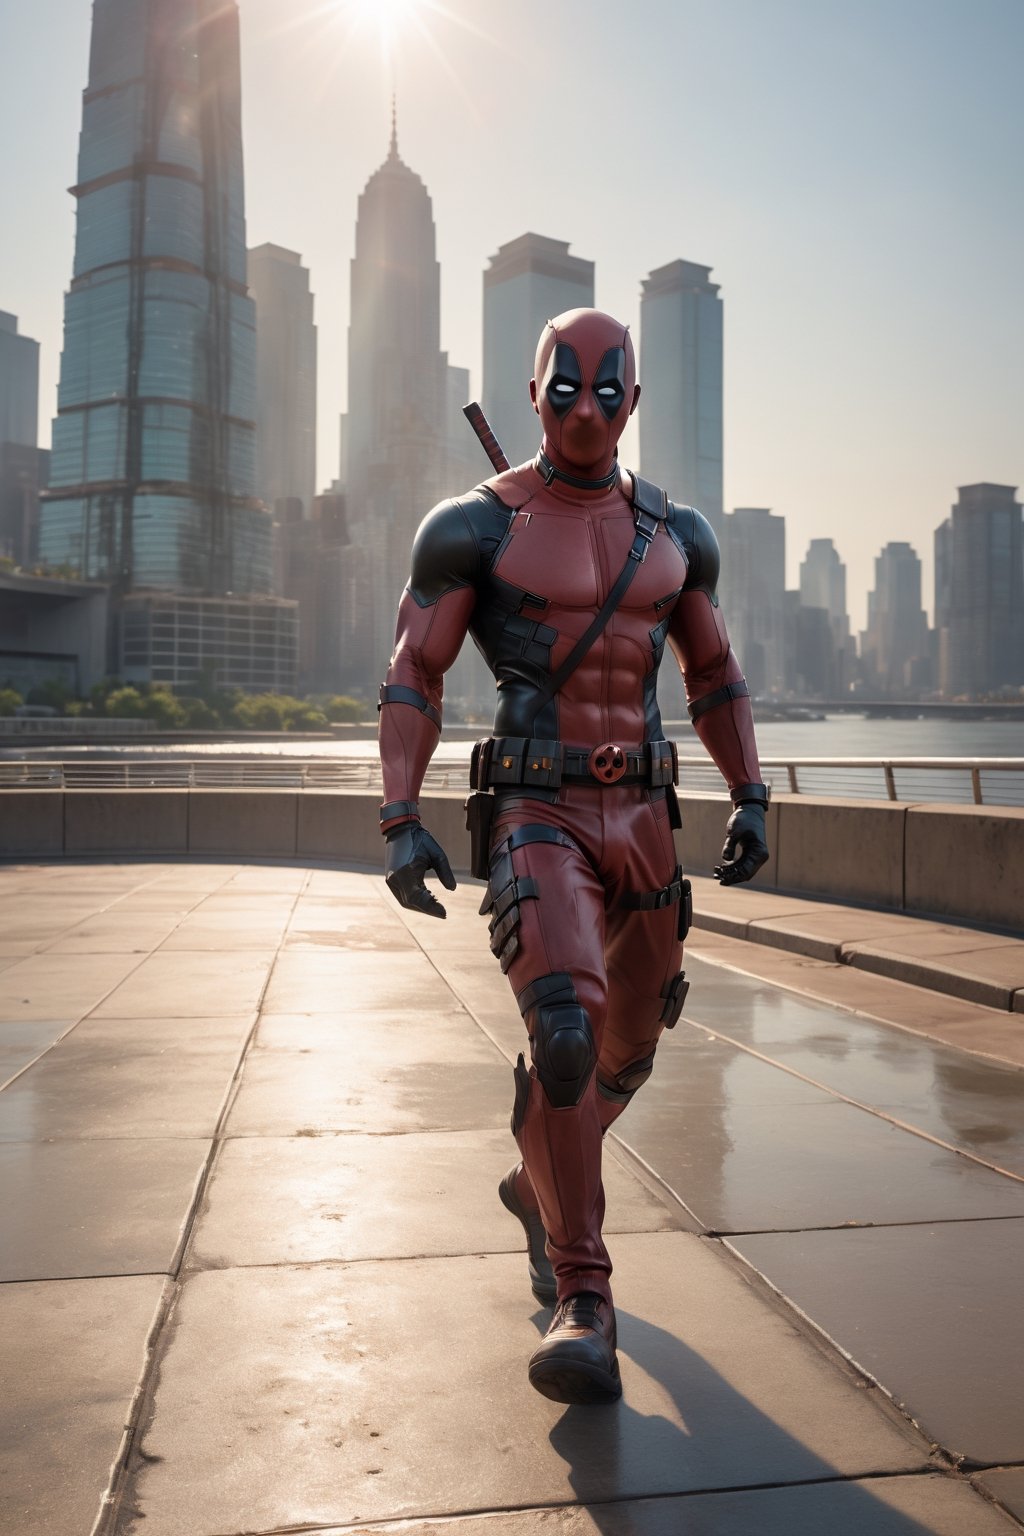 A men among mortals, Deadpool strides across the lawa with casual grace, his rippling muscles glistening in the sunlight. The city skyline towers in the background, a testament to his power and influence. The image is a modern masterpiece, rendered in stunning detail with legendary colors that pop off the screen. The dynamic shot captures the power and majesty of the moment, while the superrealism and cinematography bring it to life.

